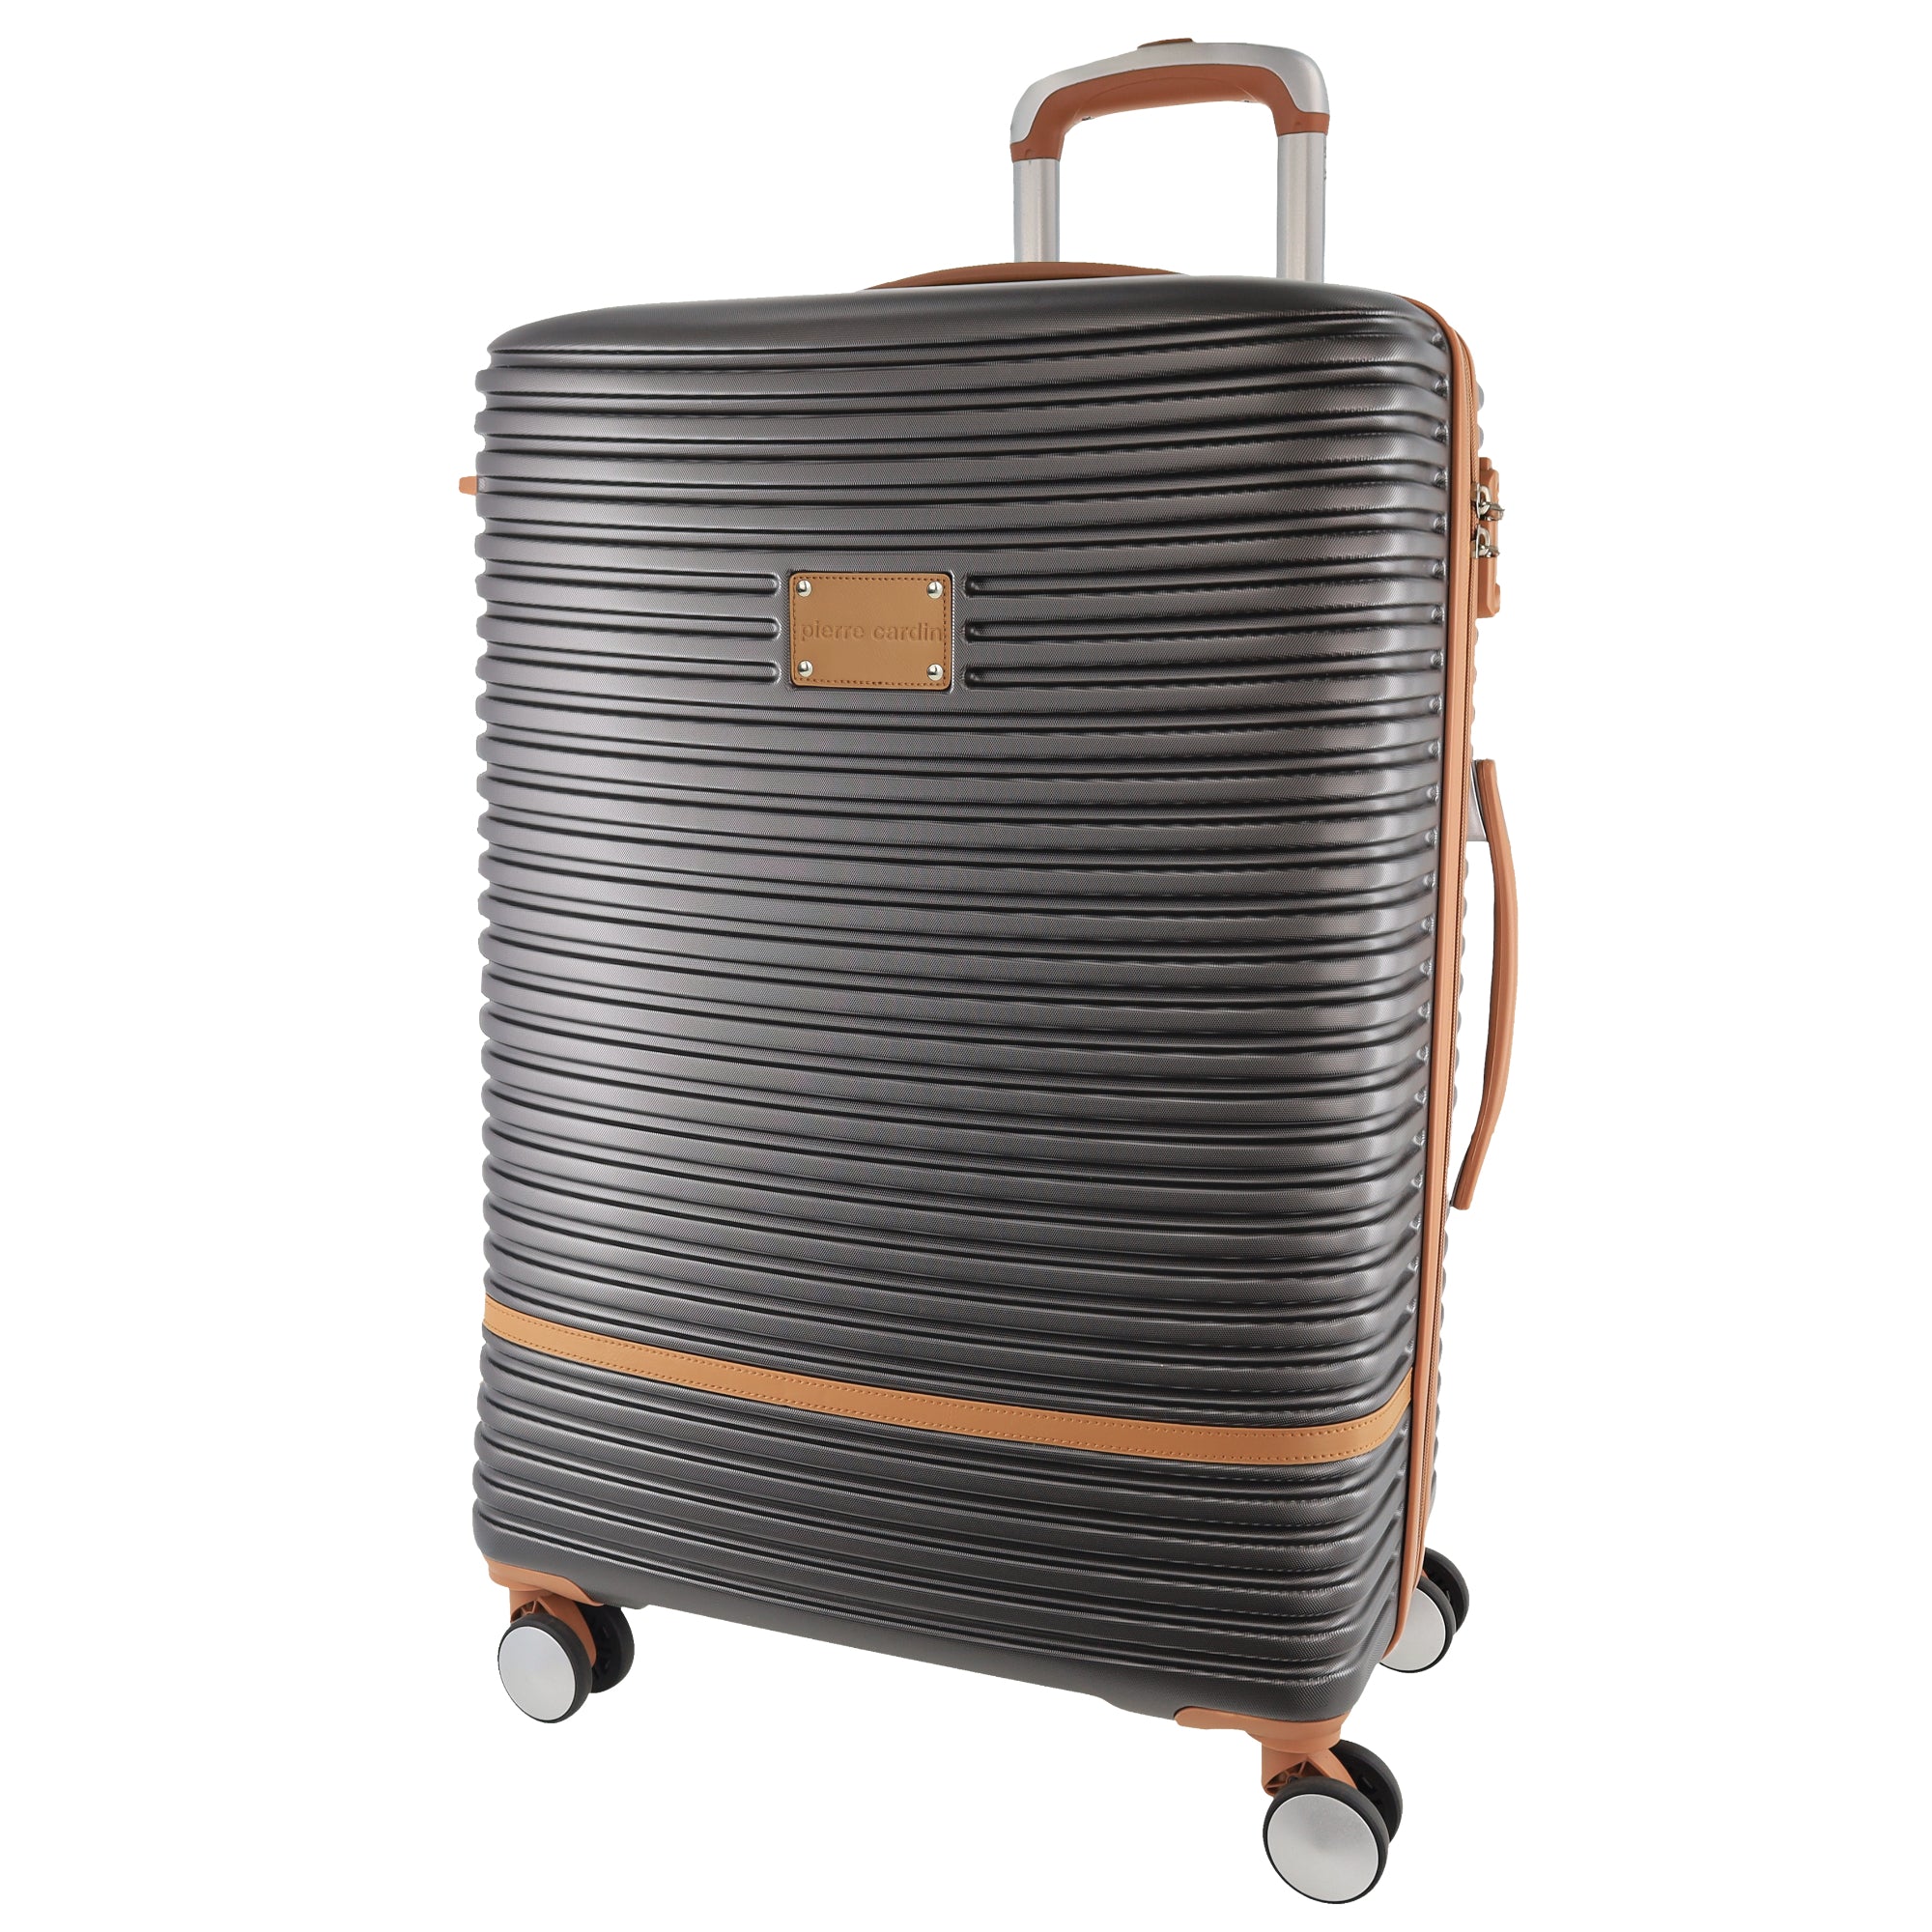 Pierre Cardin 80cm LARGE Hard Shell Suitcase in Charcoal